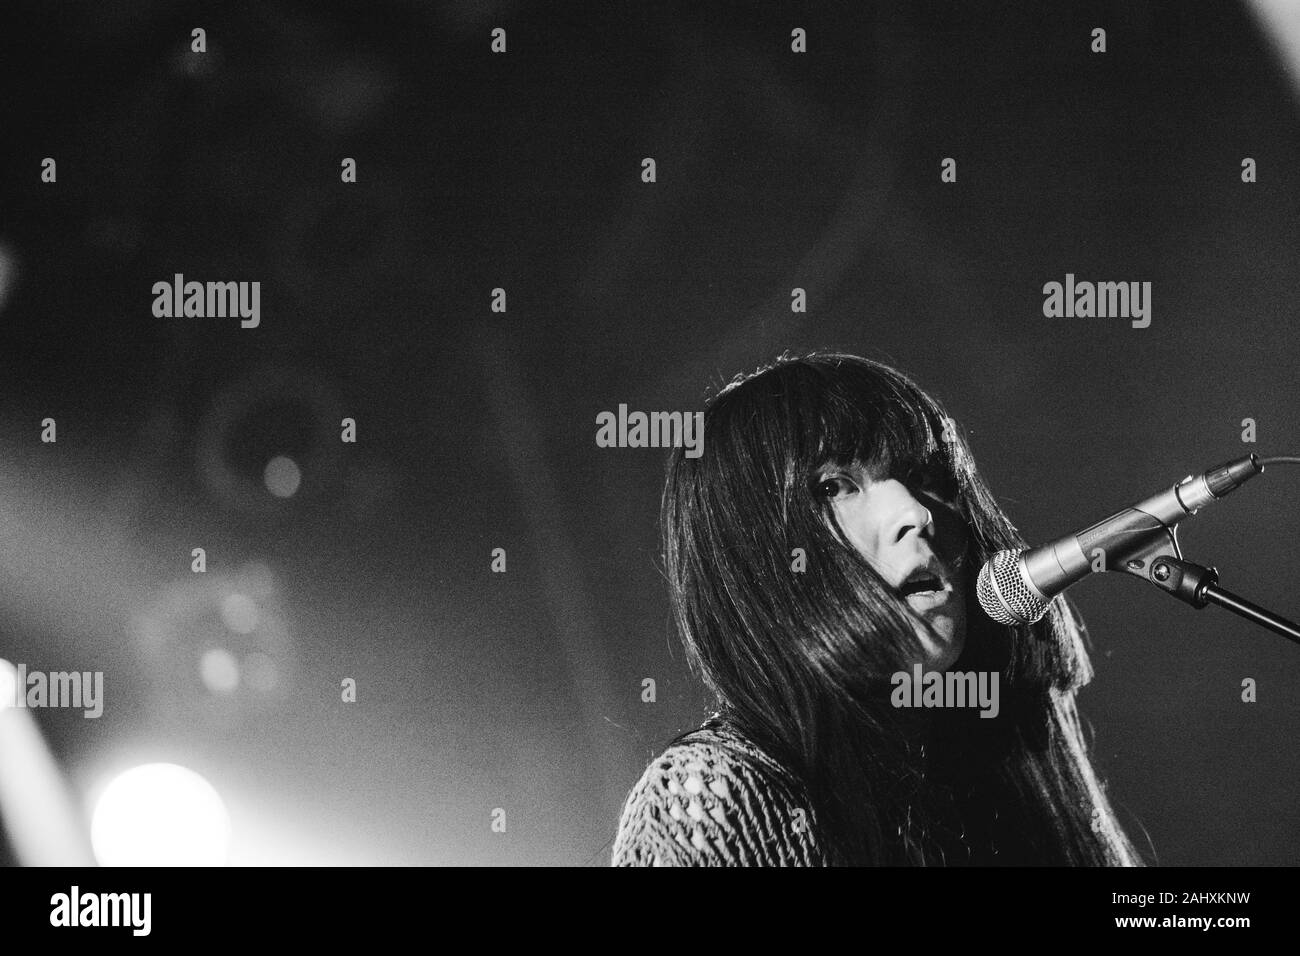 Copenhagen, Denmark. 22nd, February 2019. The Japanese noise rock abdn Bo Ningen performs a live concert at Pumpehuset as part of Journey Fest 2019 in Copenhagen. Here bass player and vocalist Taigen Kawabe is seen live on stage. (Photo credit: Gonzales Photo - Mathias Kristensen). Stock Photo